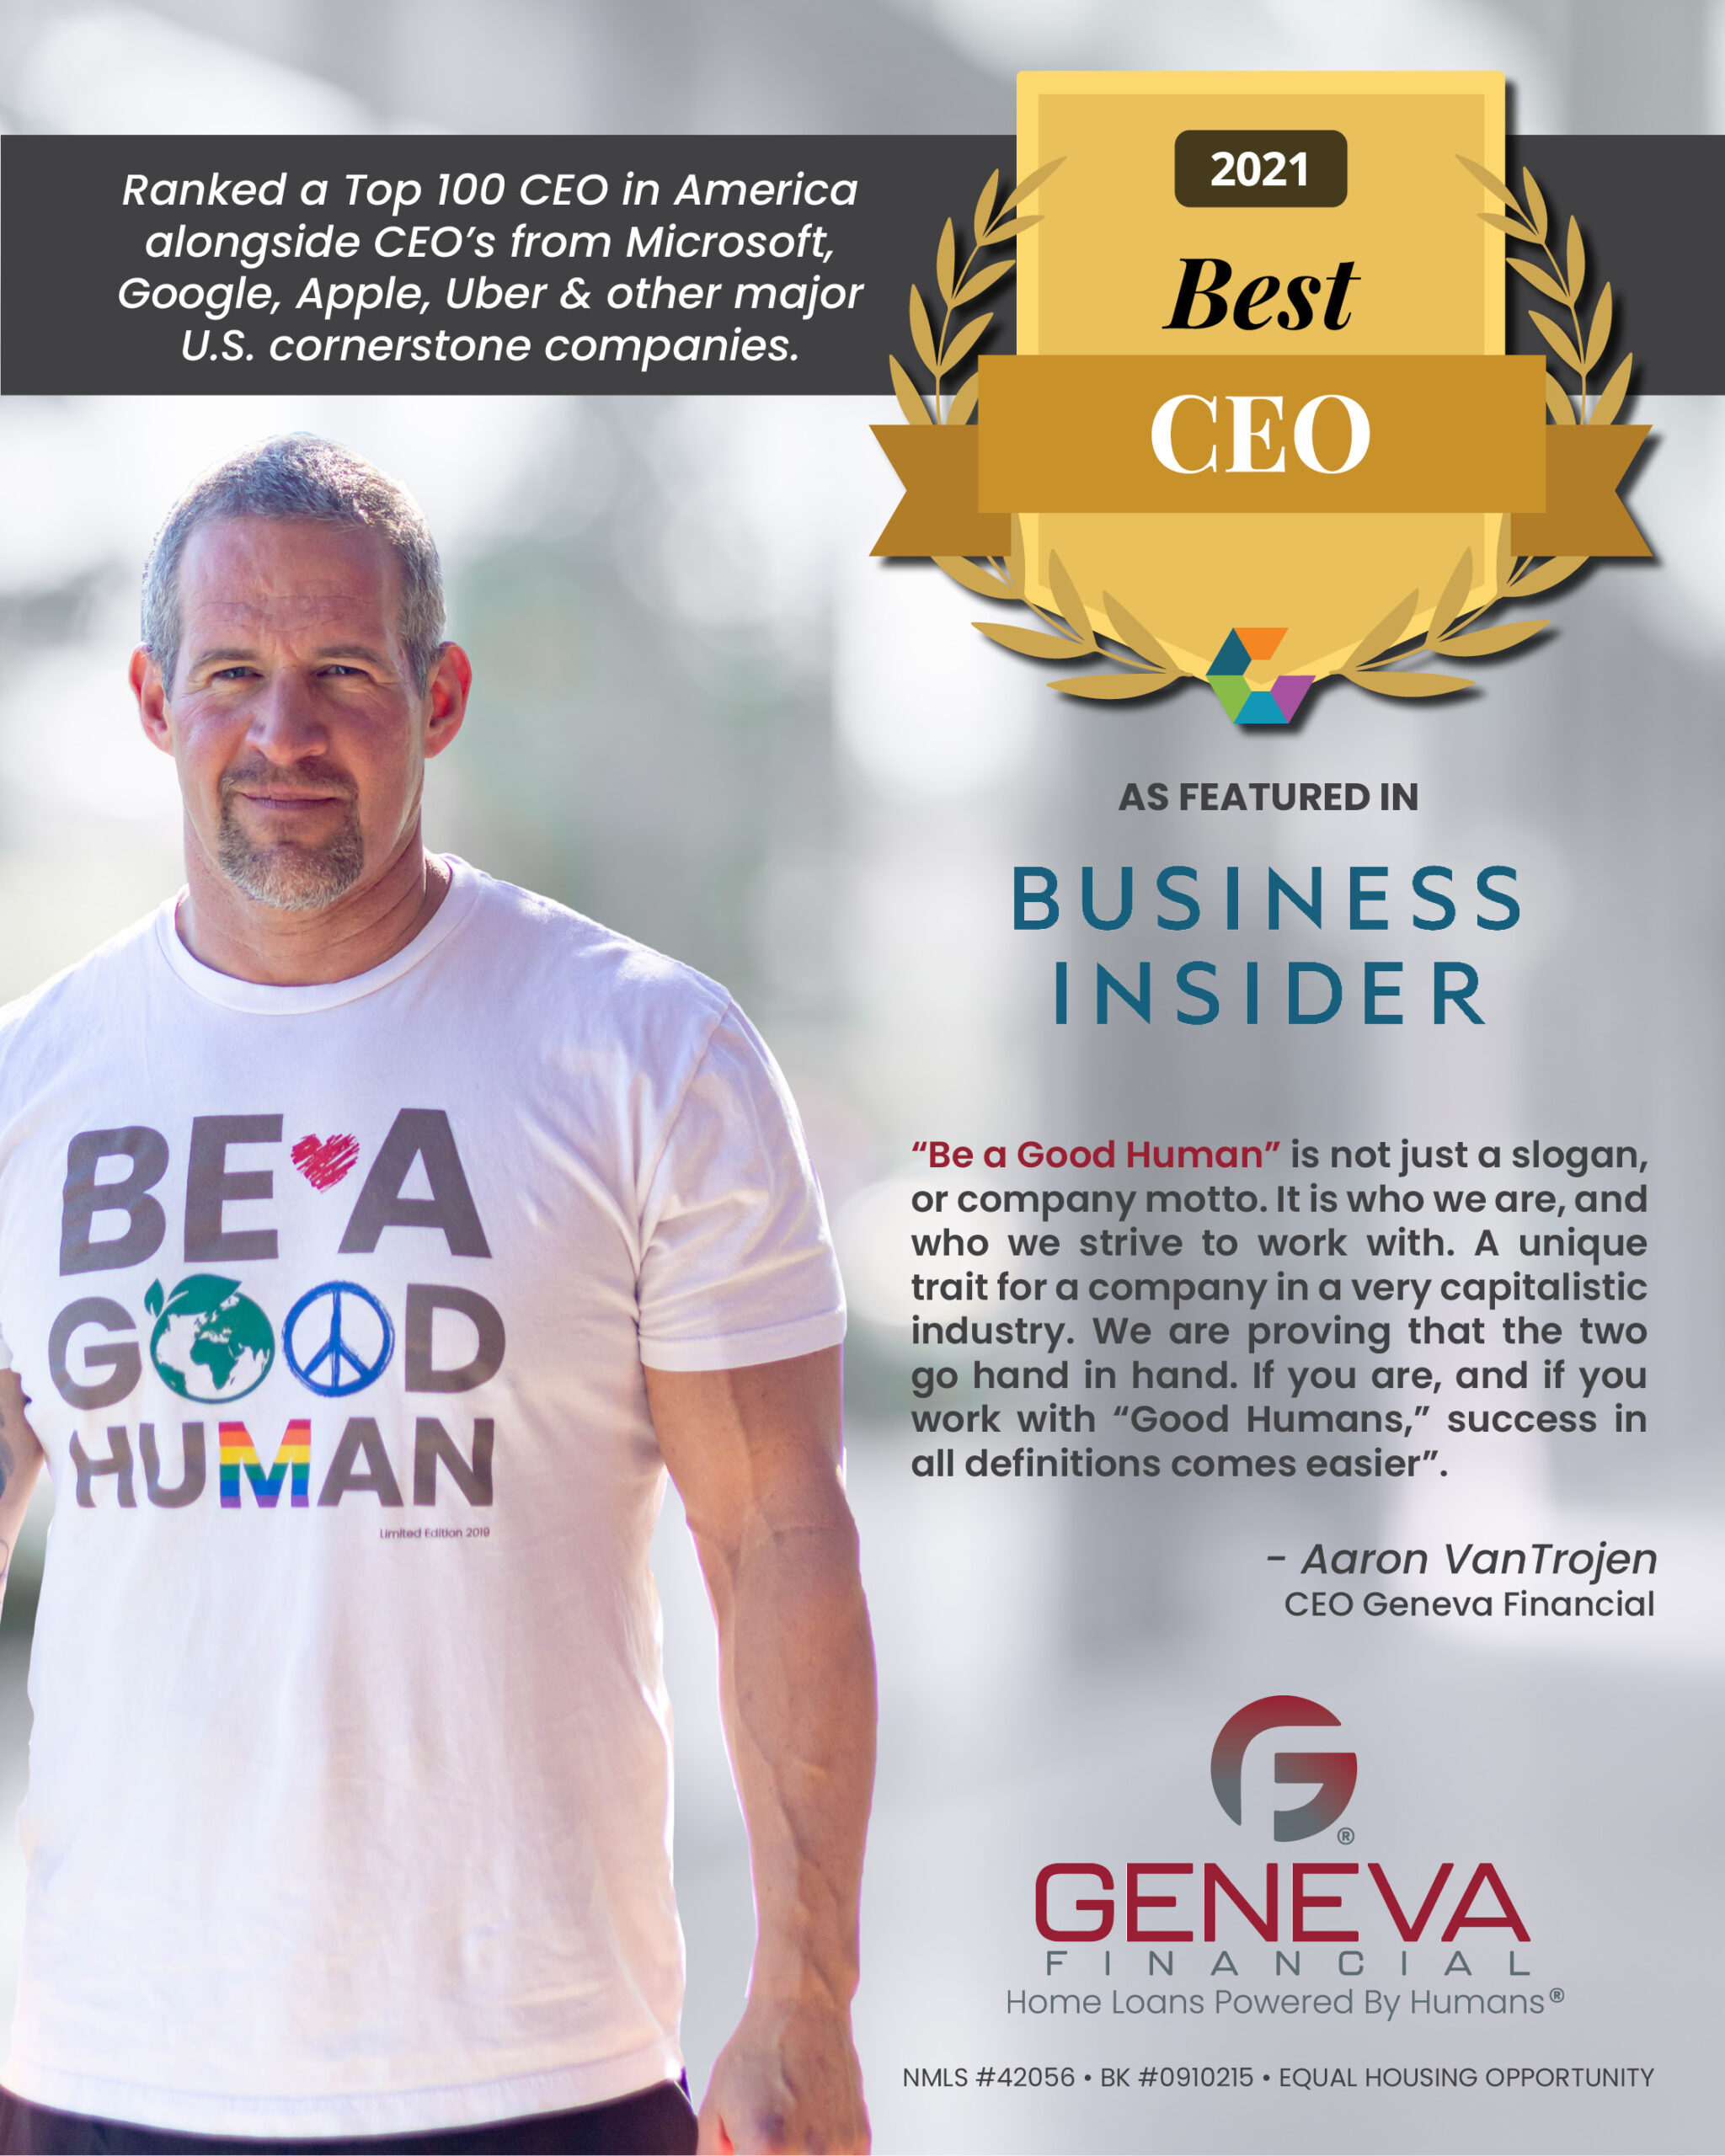 Geneva Financial is honored to announce we have been awarded a Best CEO for 2021 via Comparbly.com for large companies.